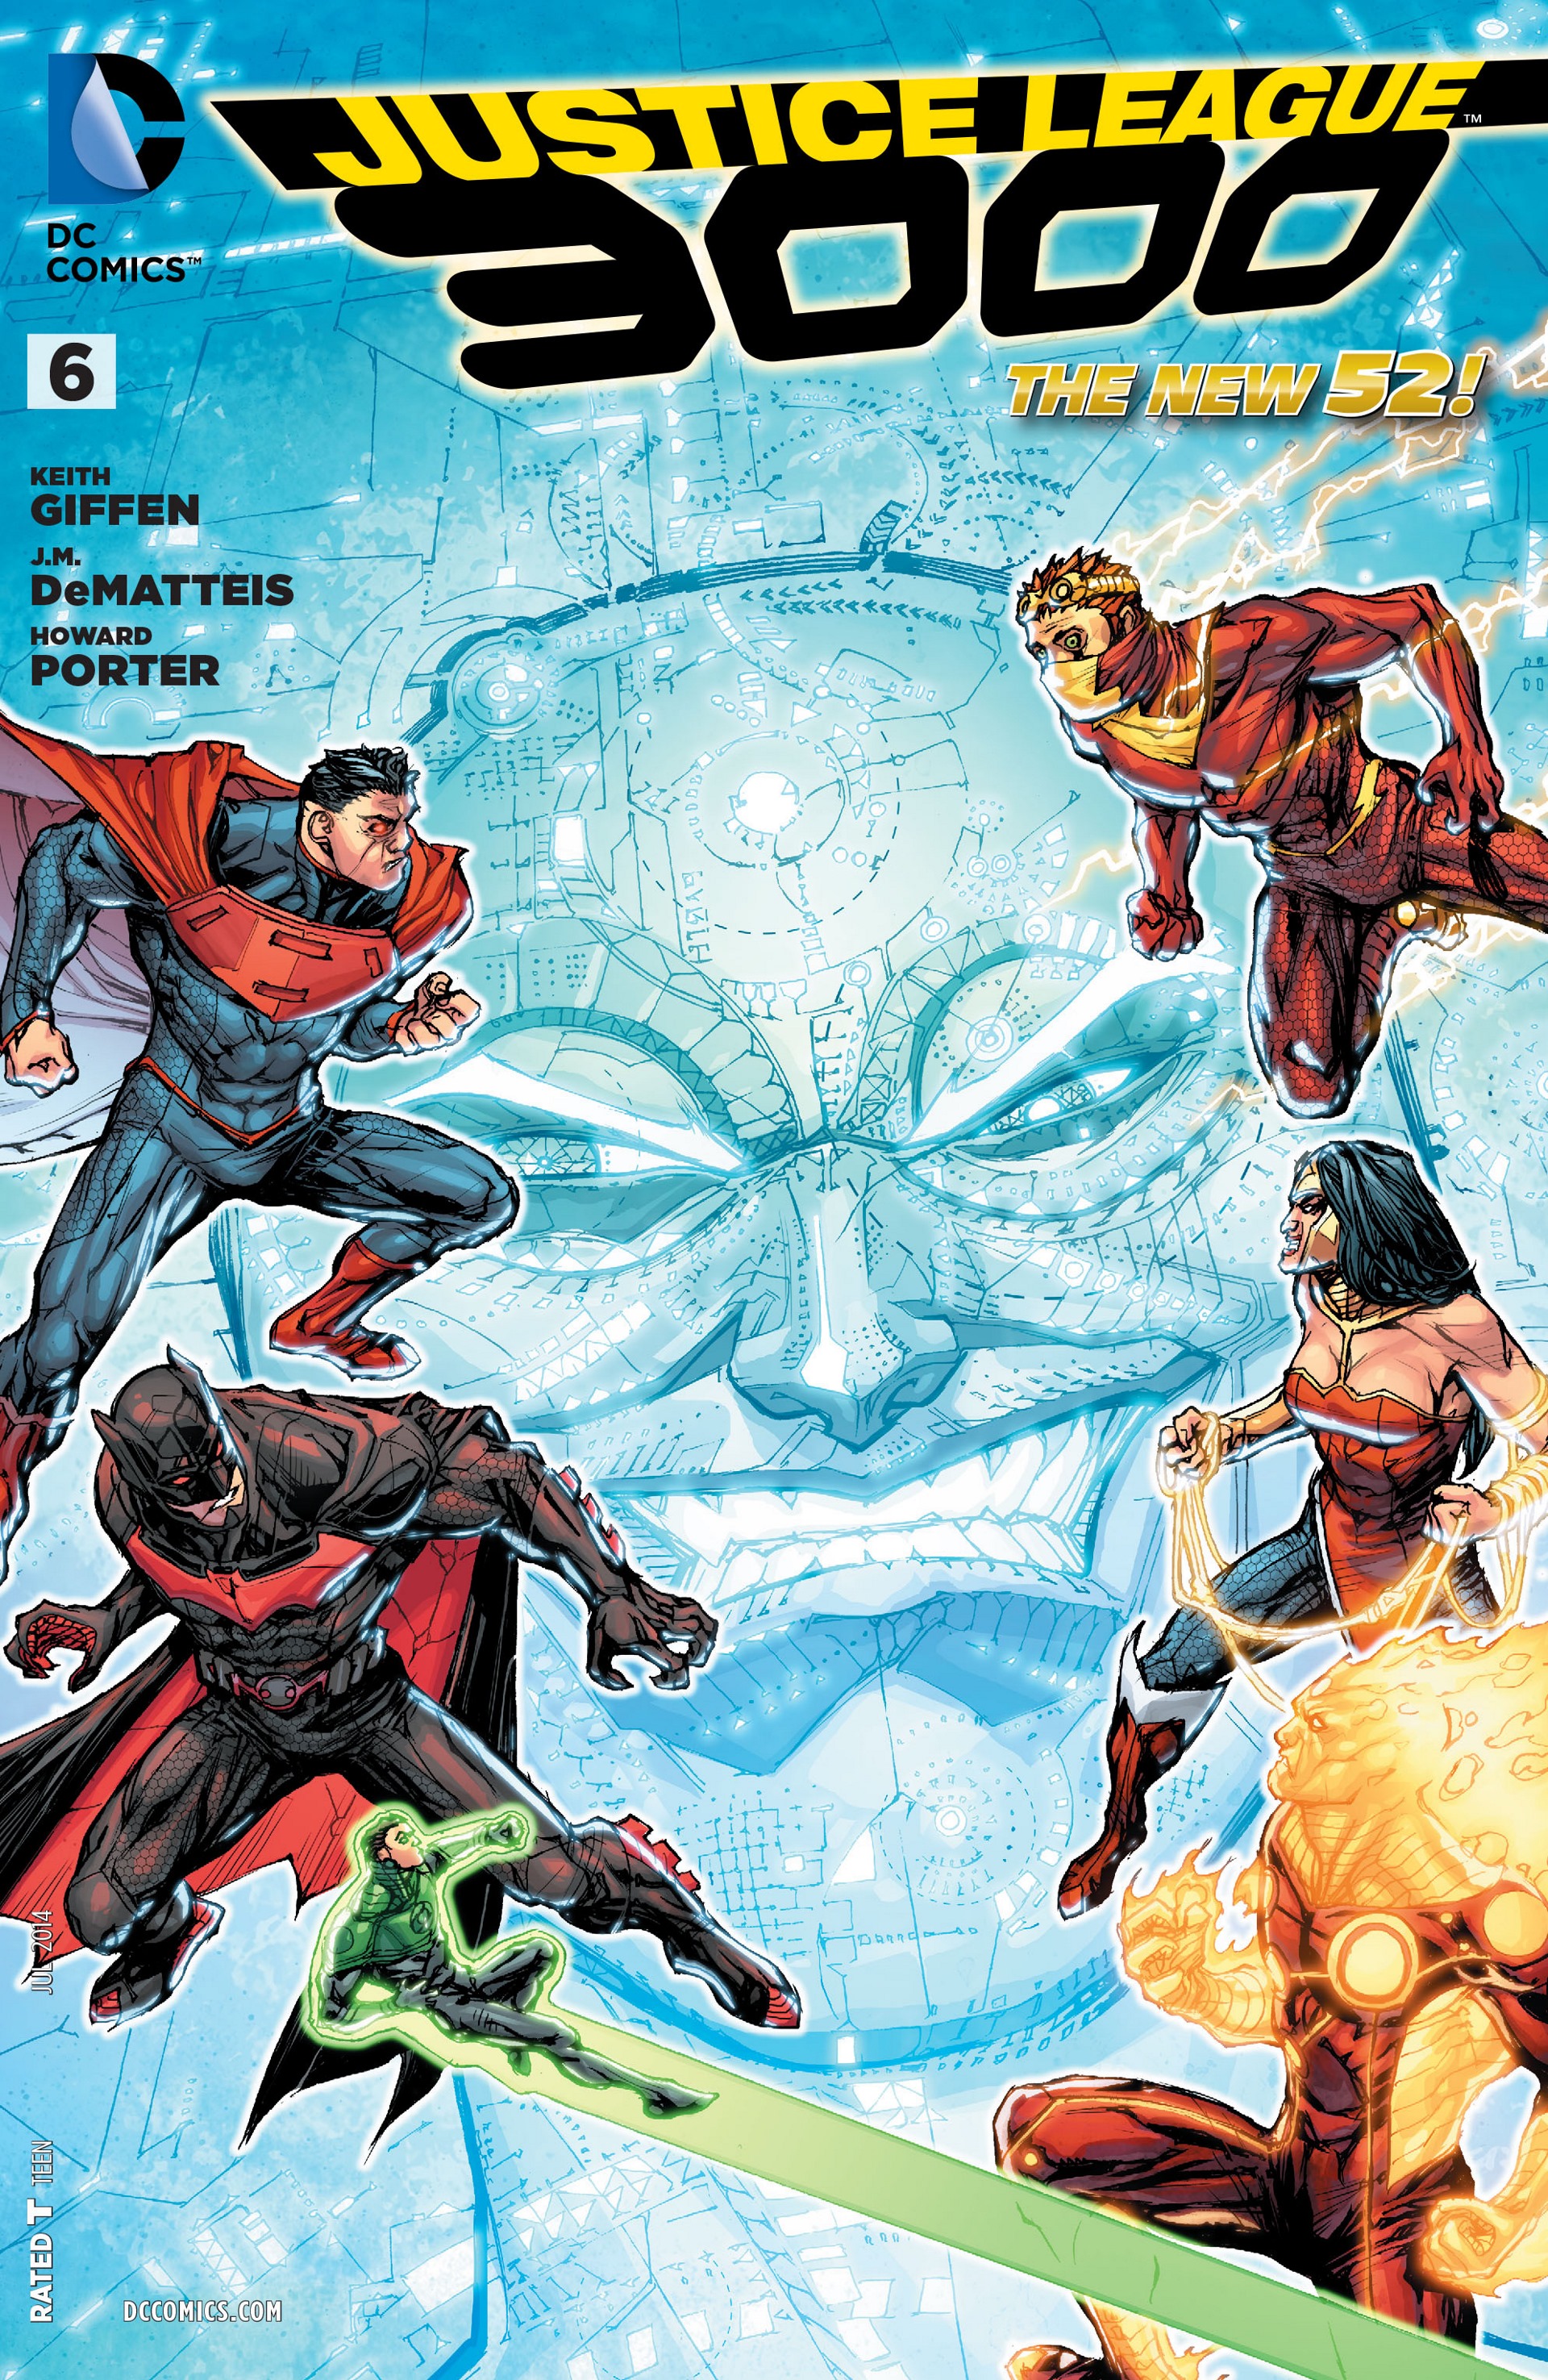 Read online Justice League 3000 comic -  Issue #6 - 1